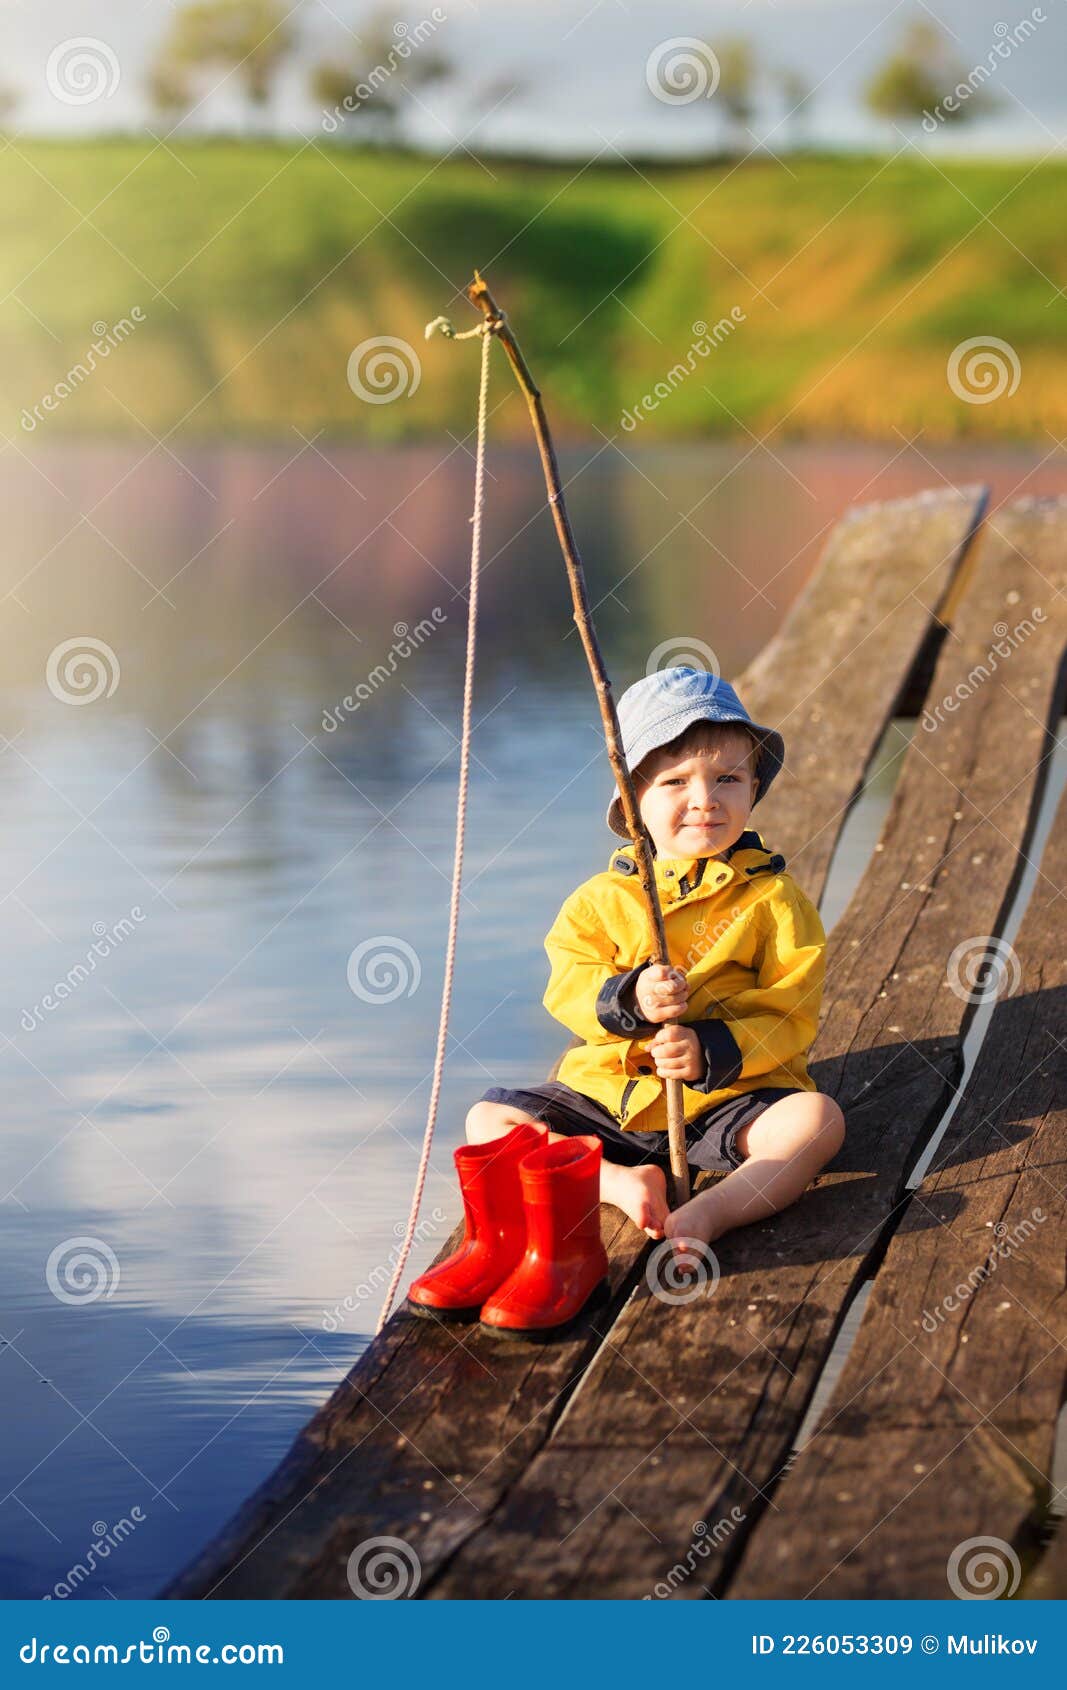 Boy on Wooden Dock with a Fishing Net Stock Image - Image of